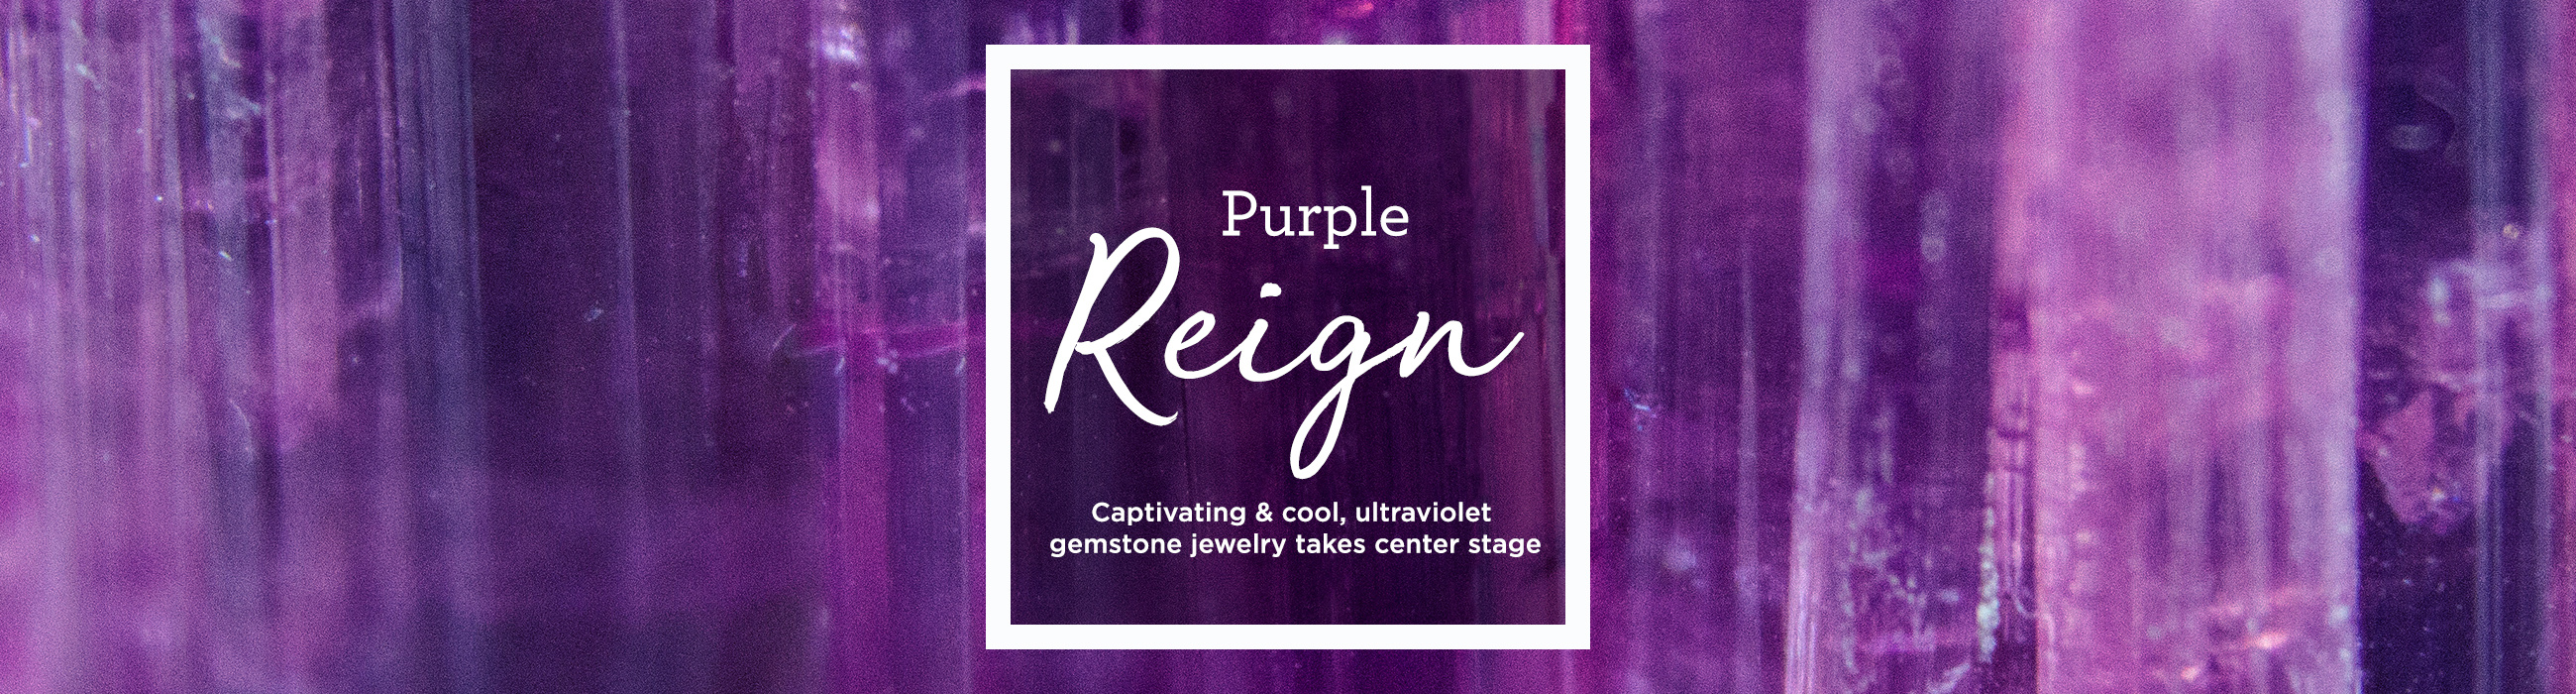 Purple Reign  Captivating & cool, ultraviolet gemstone jewelry takes center stage